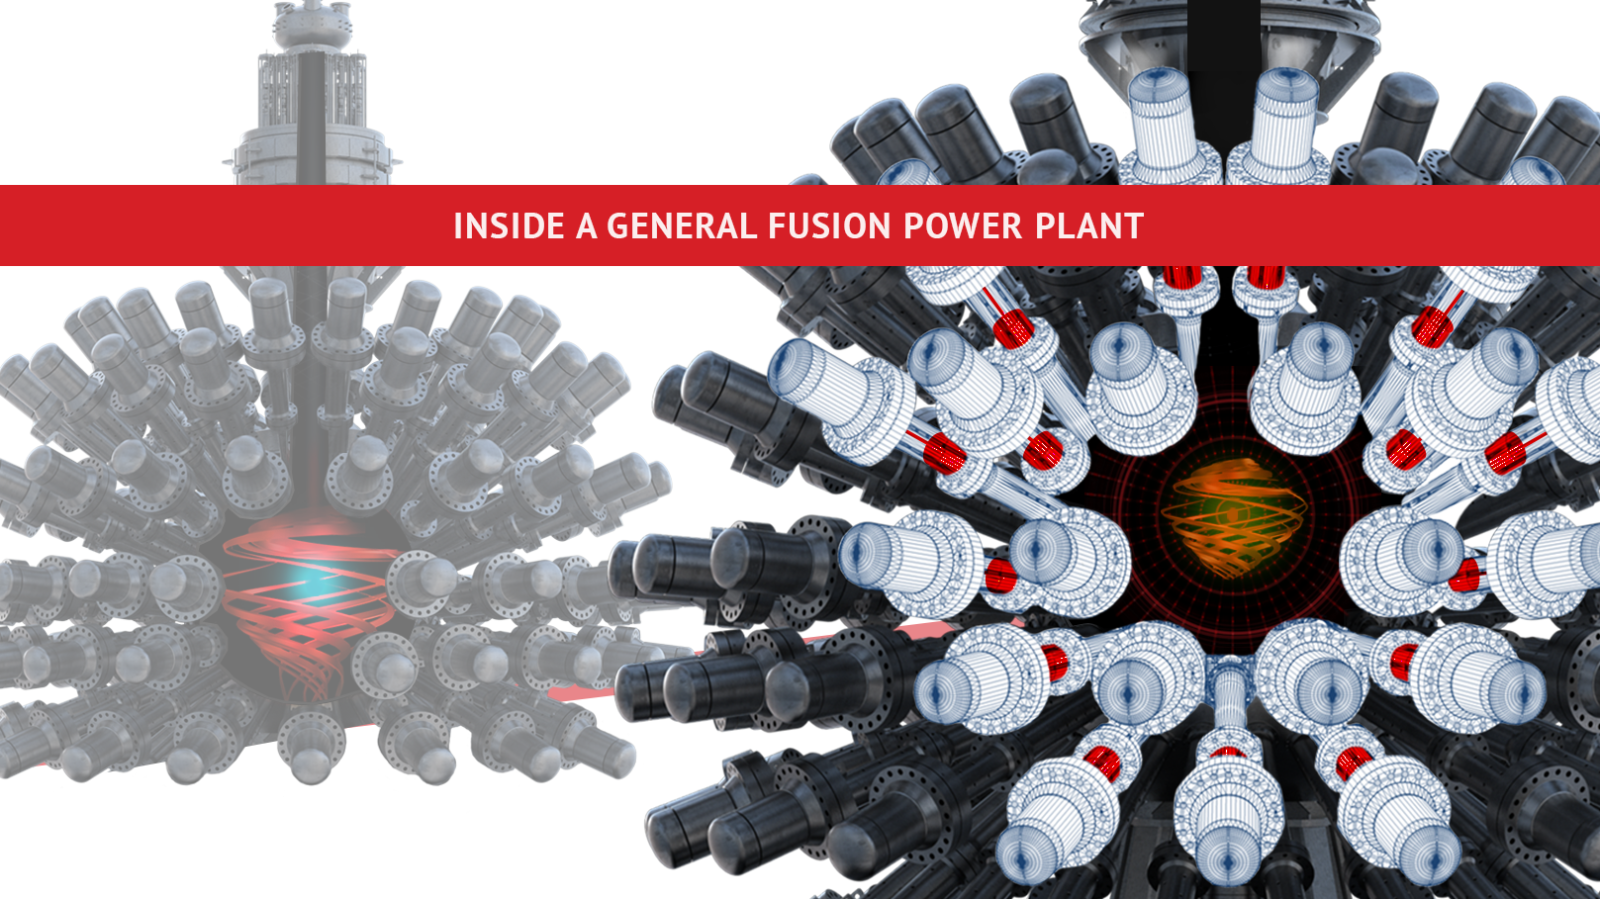 Infographic #1: Inside a General Fusion power plant